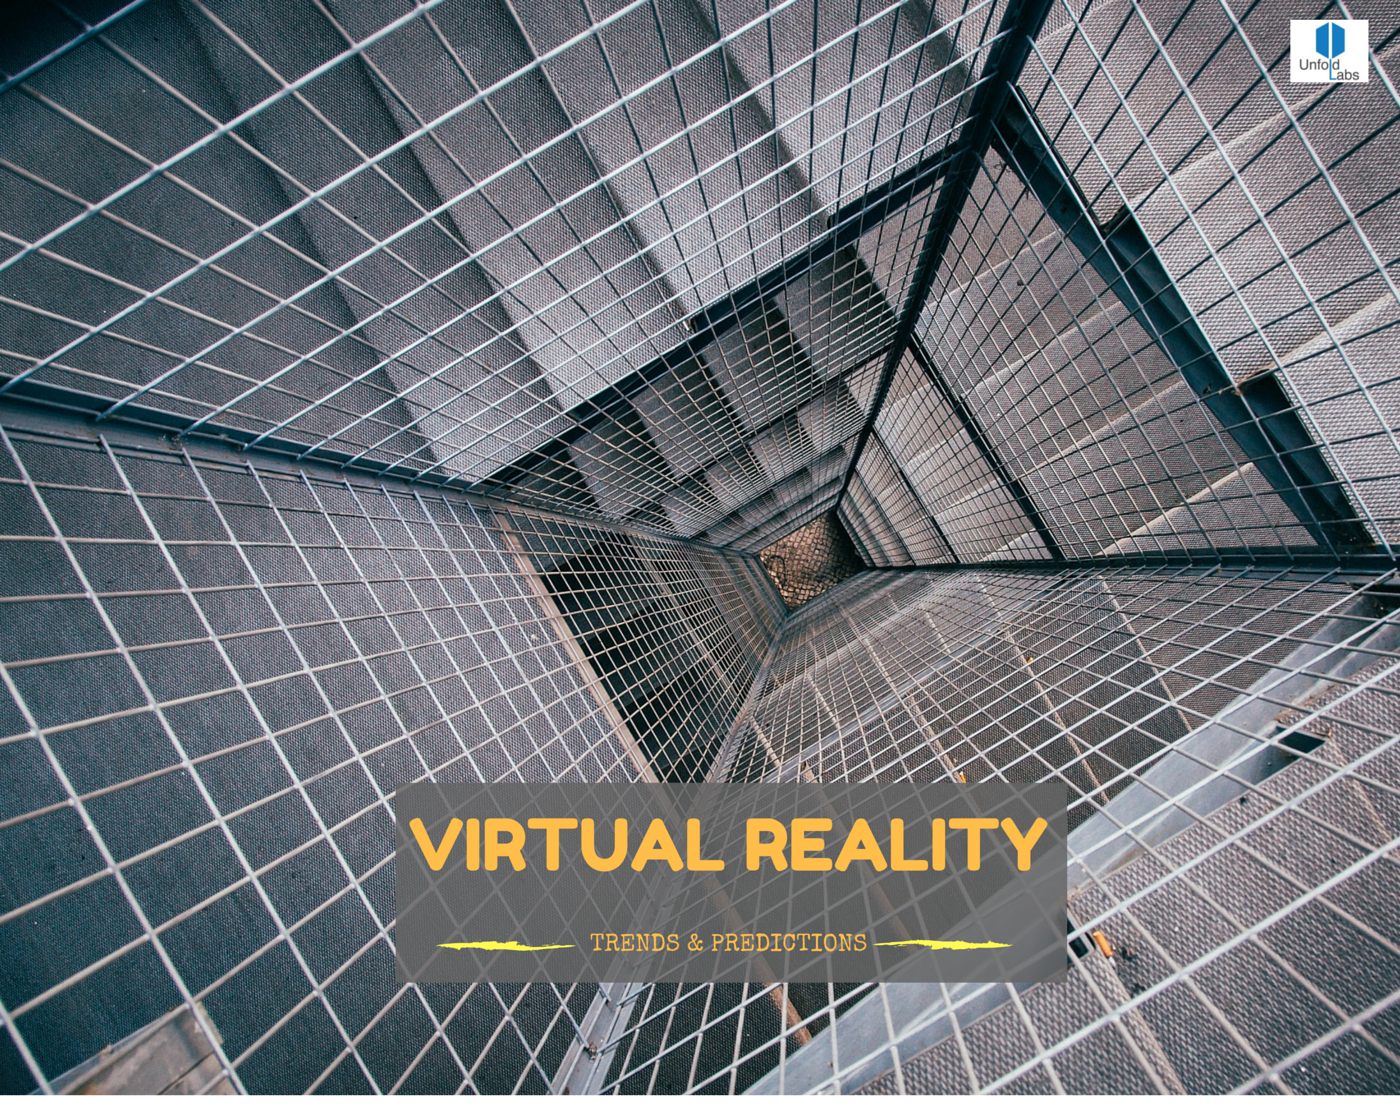 Unfolding Virtual Reality: Trends & Predictions